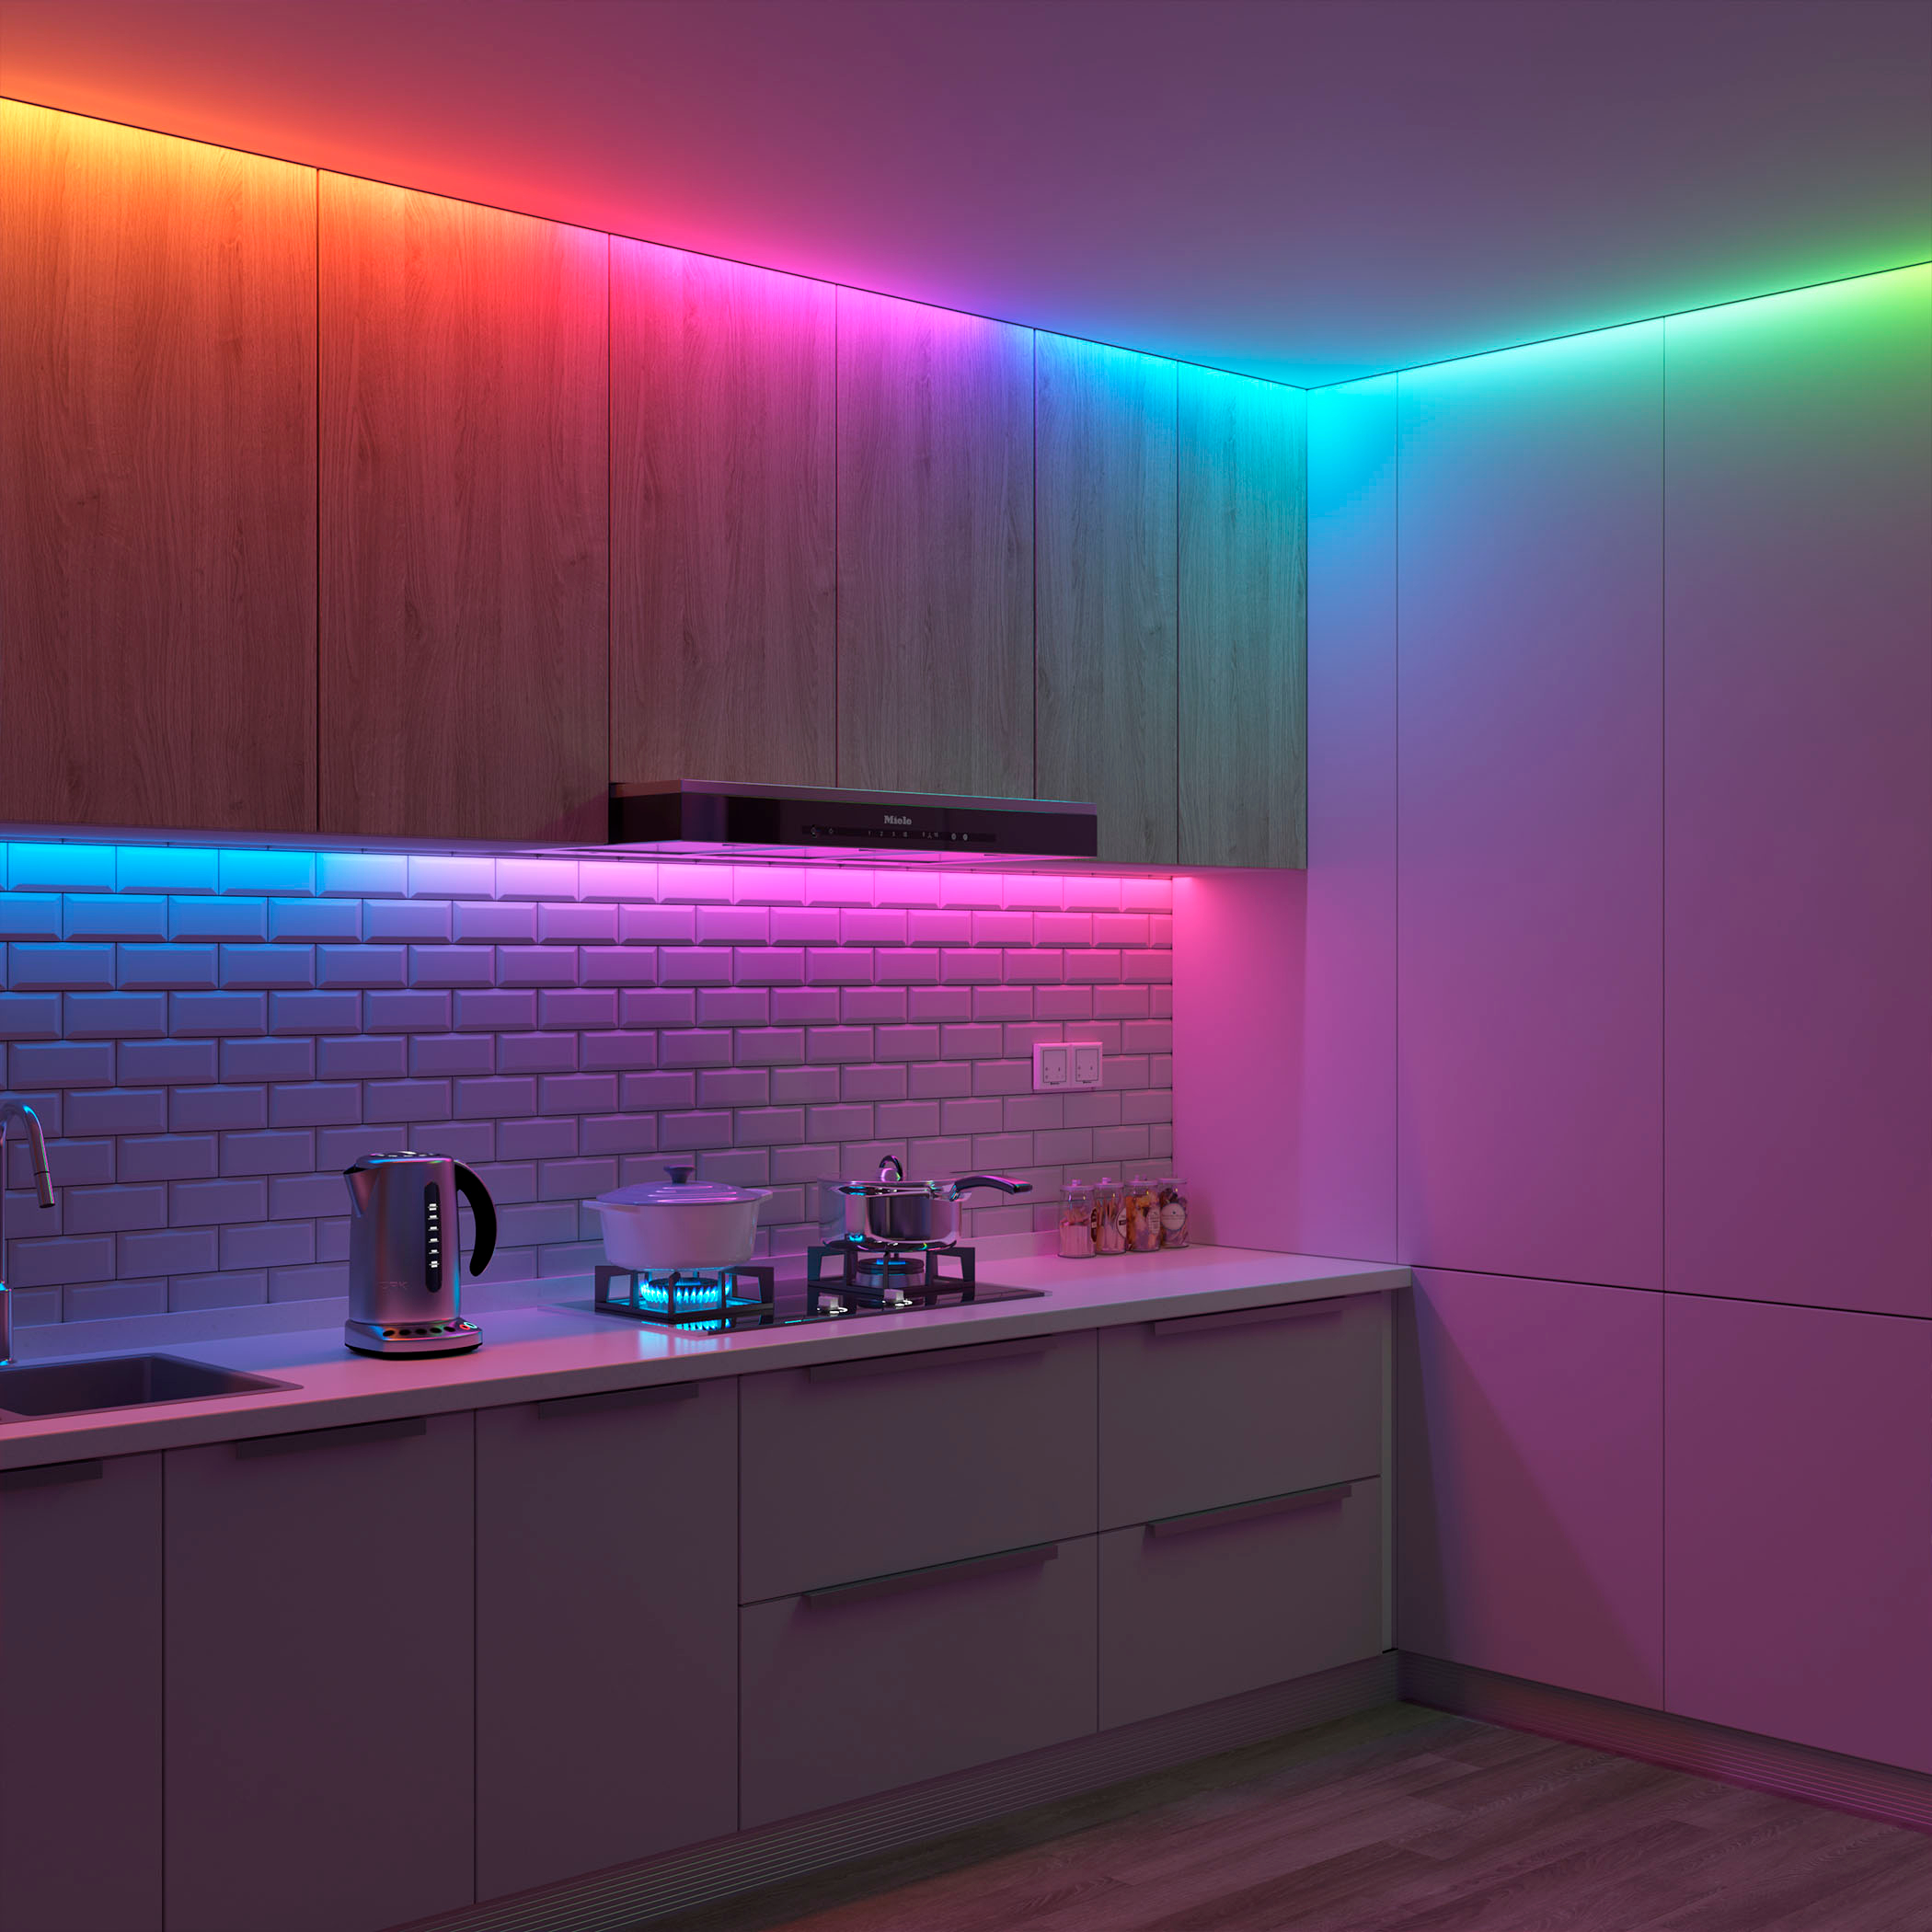 Govee RGB Strip Lights Review: Great Features, Low Price